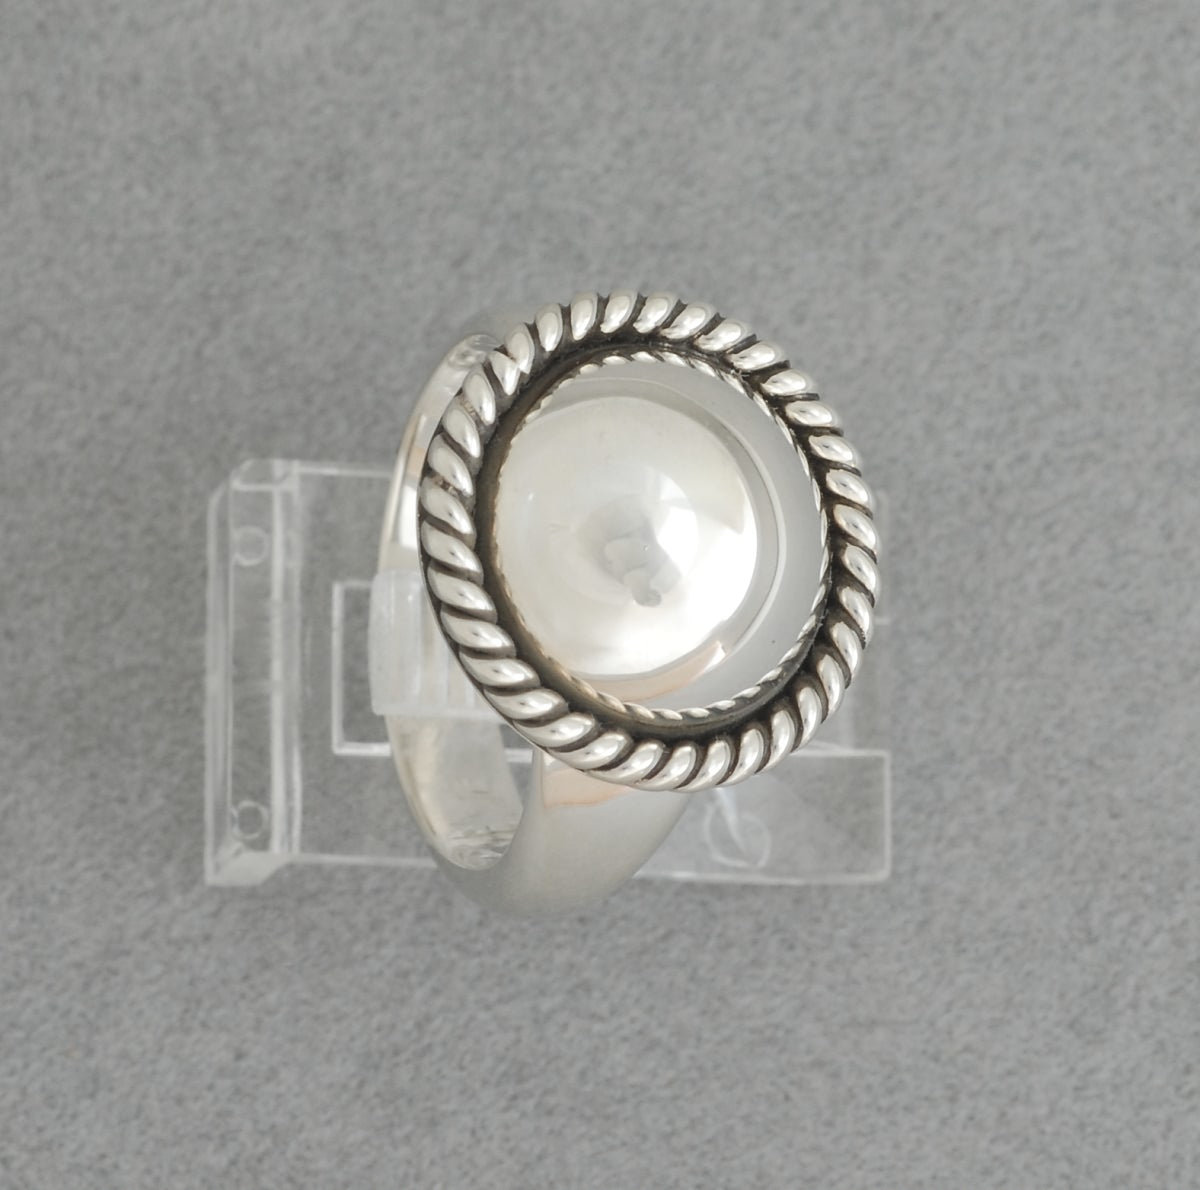 Ring with Dome and Twist by Artie Yellowhorse